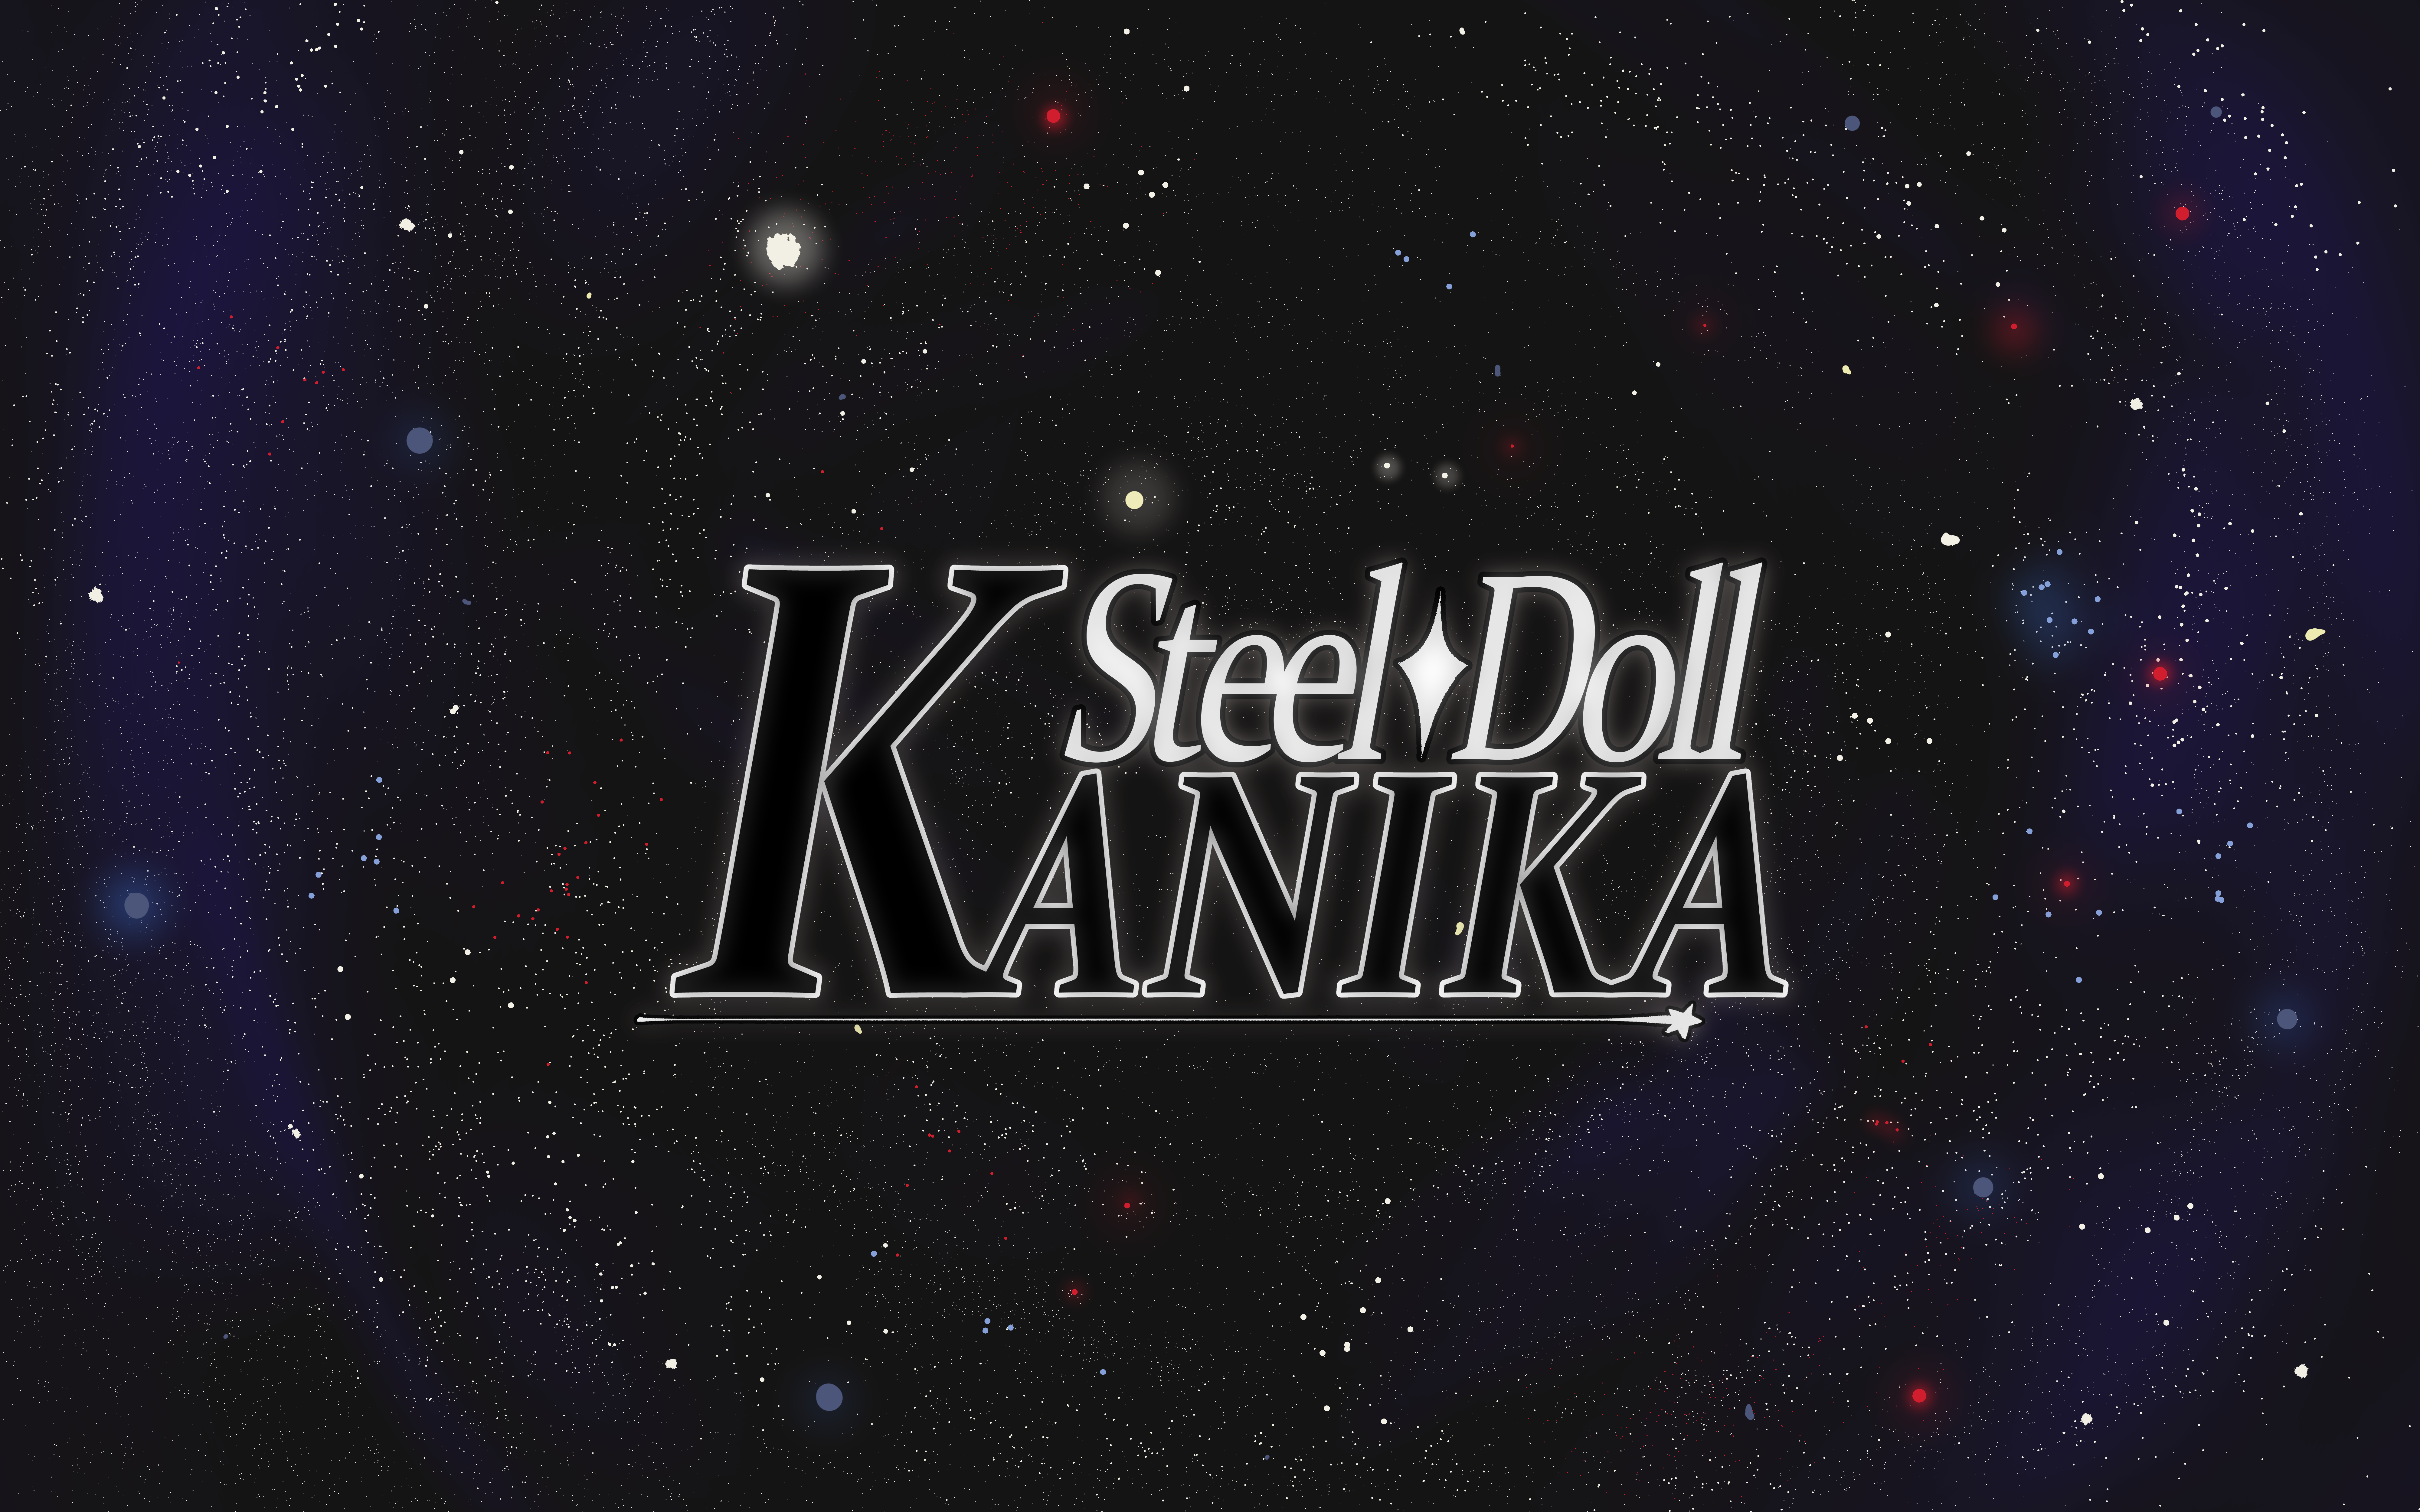 A concept graphic of the Steel Doll Kanika logo.